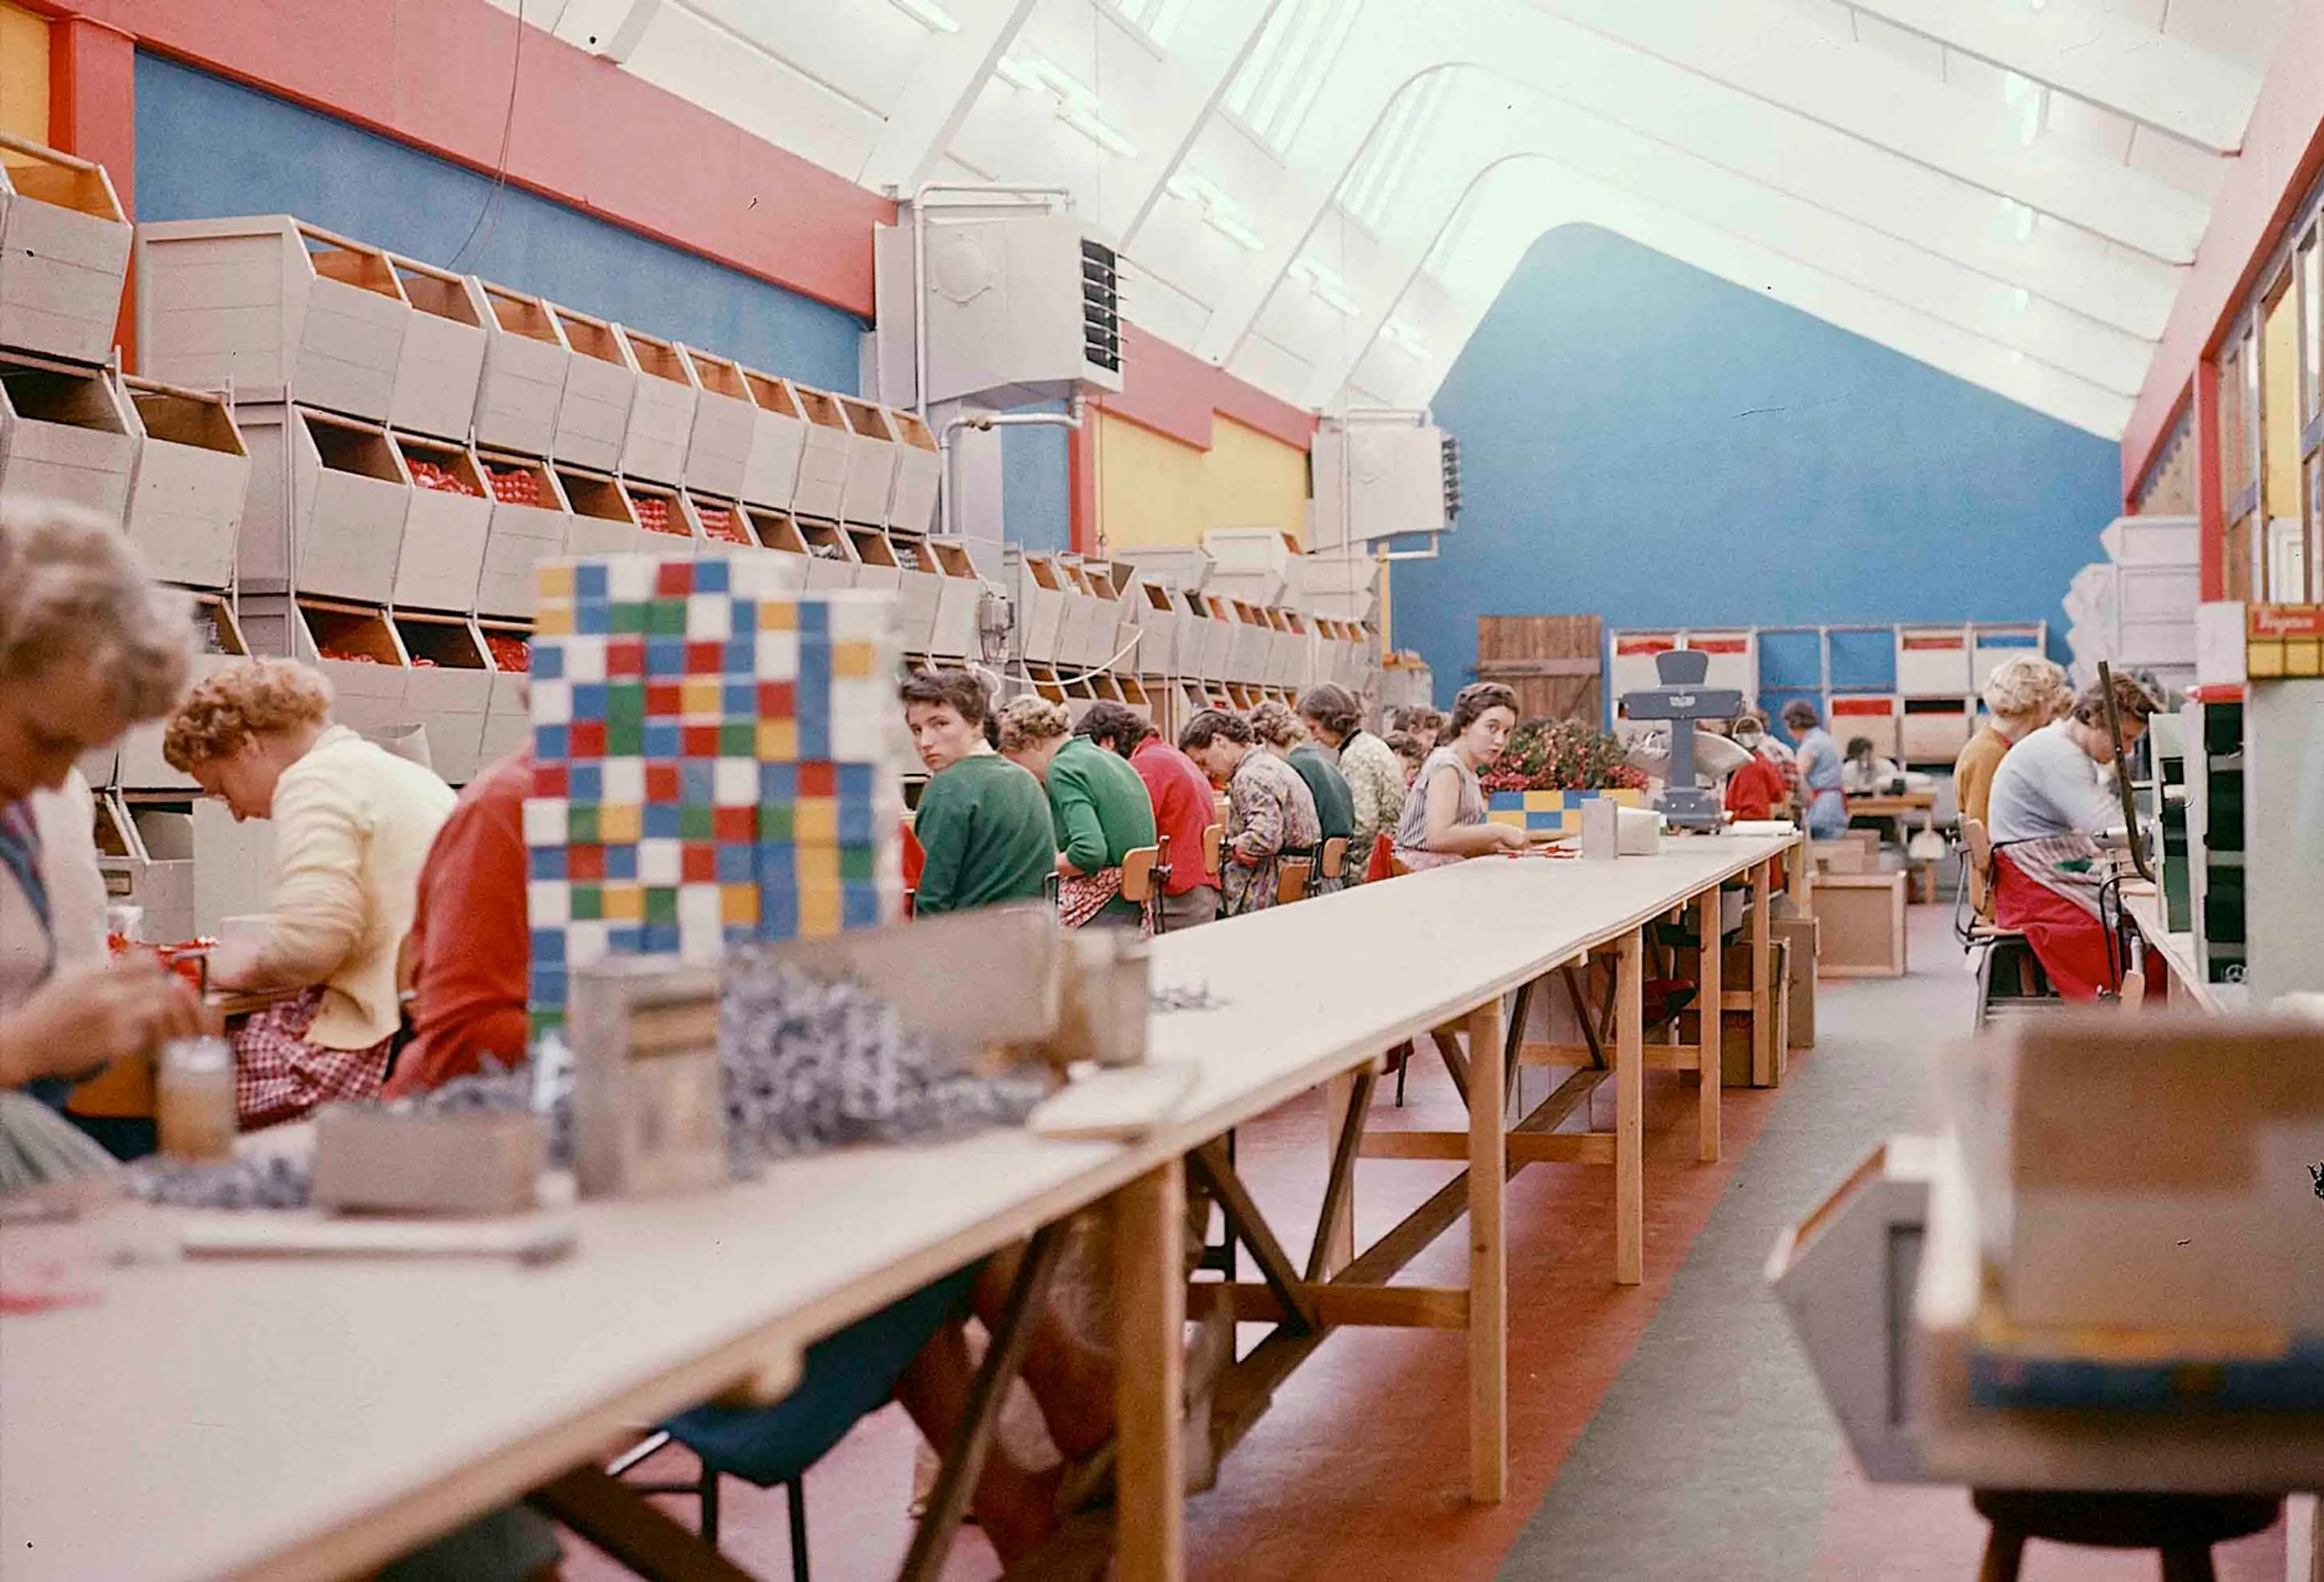 inside the LEGO packing facilities